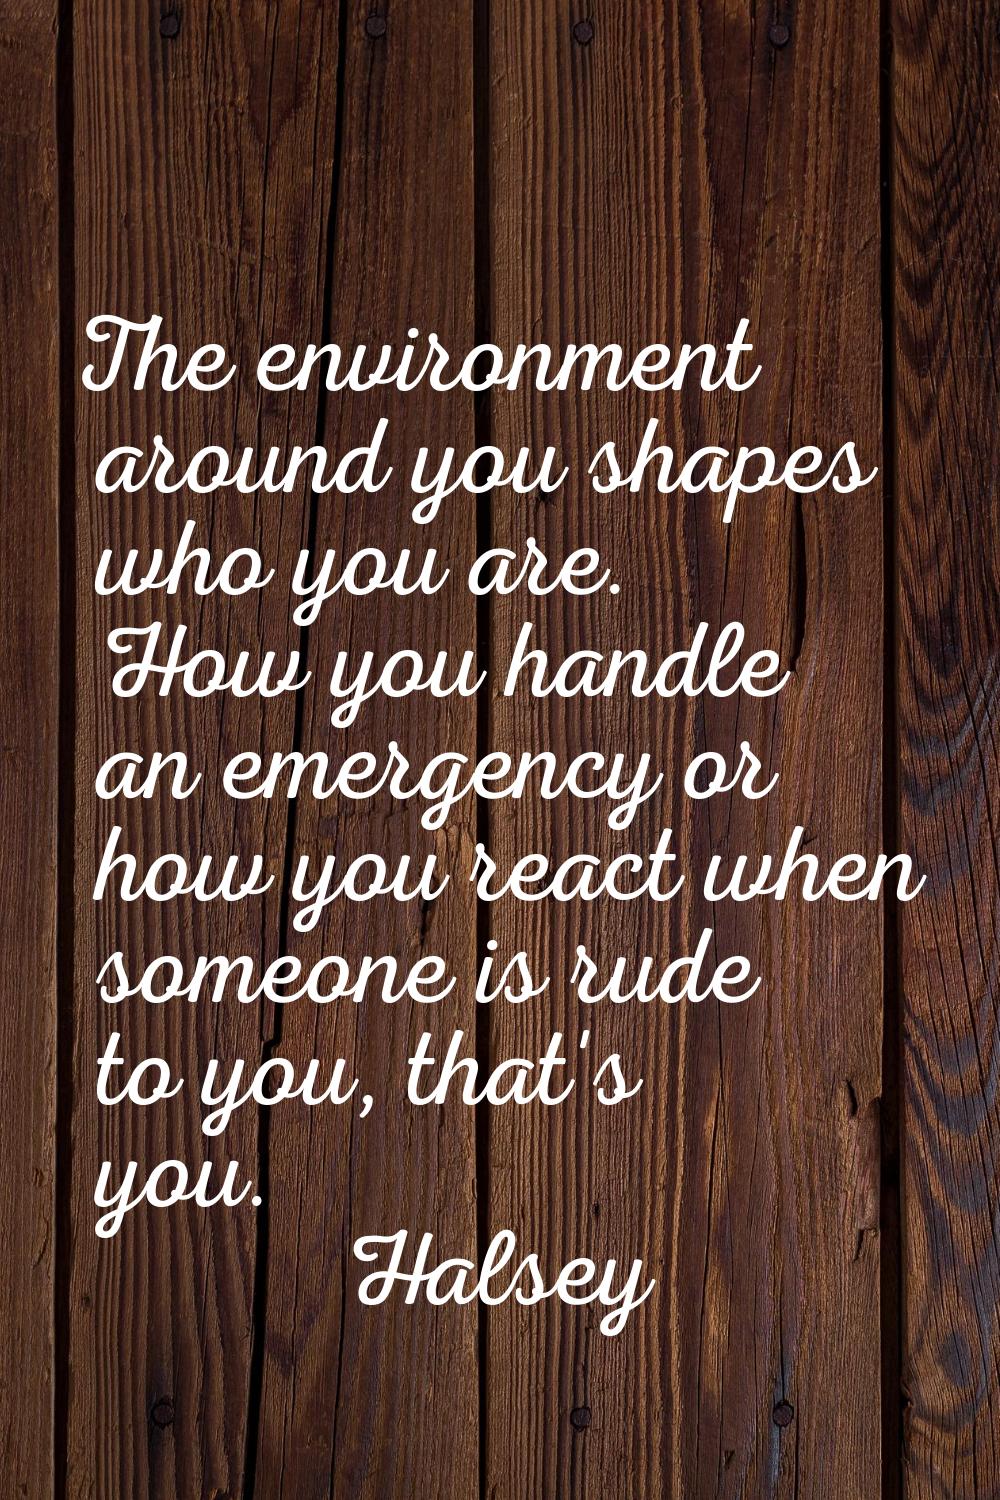 The environment around you shapes who you are. How you handle an emergency or how you react when so